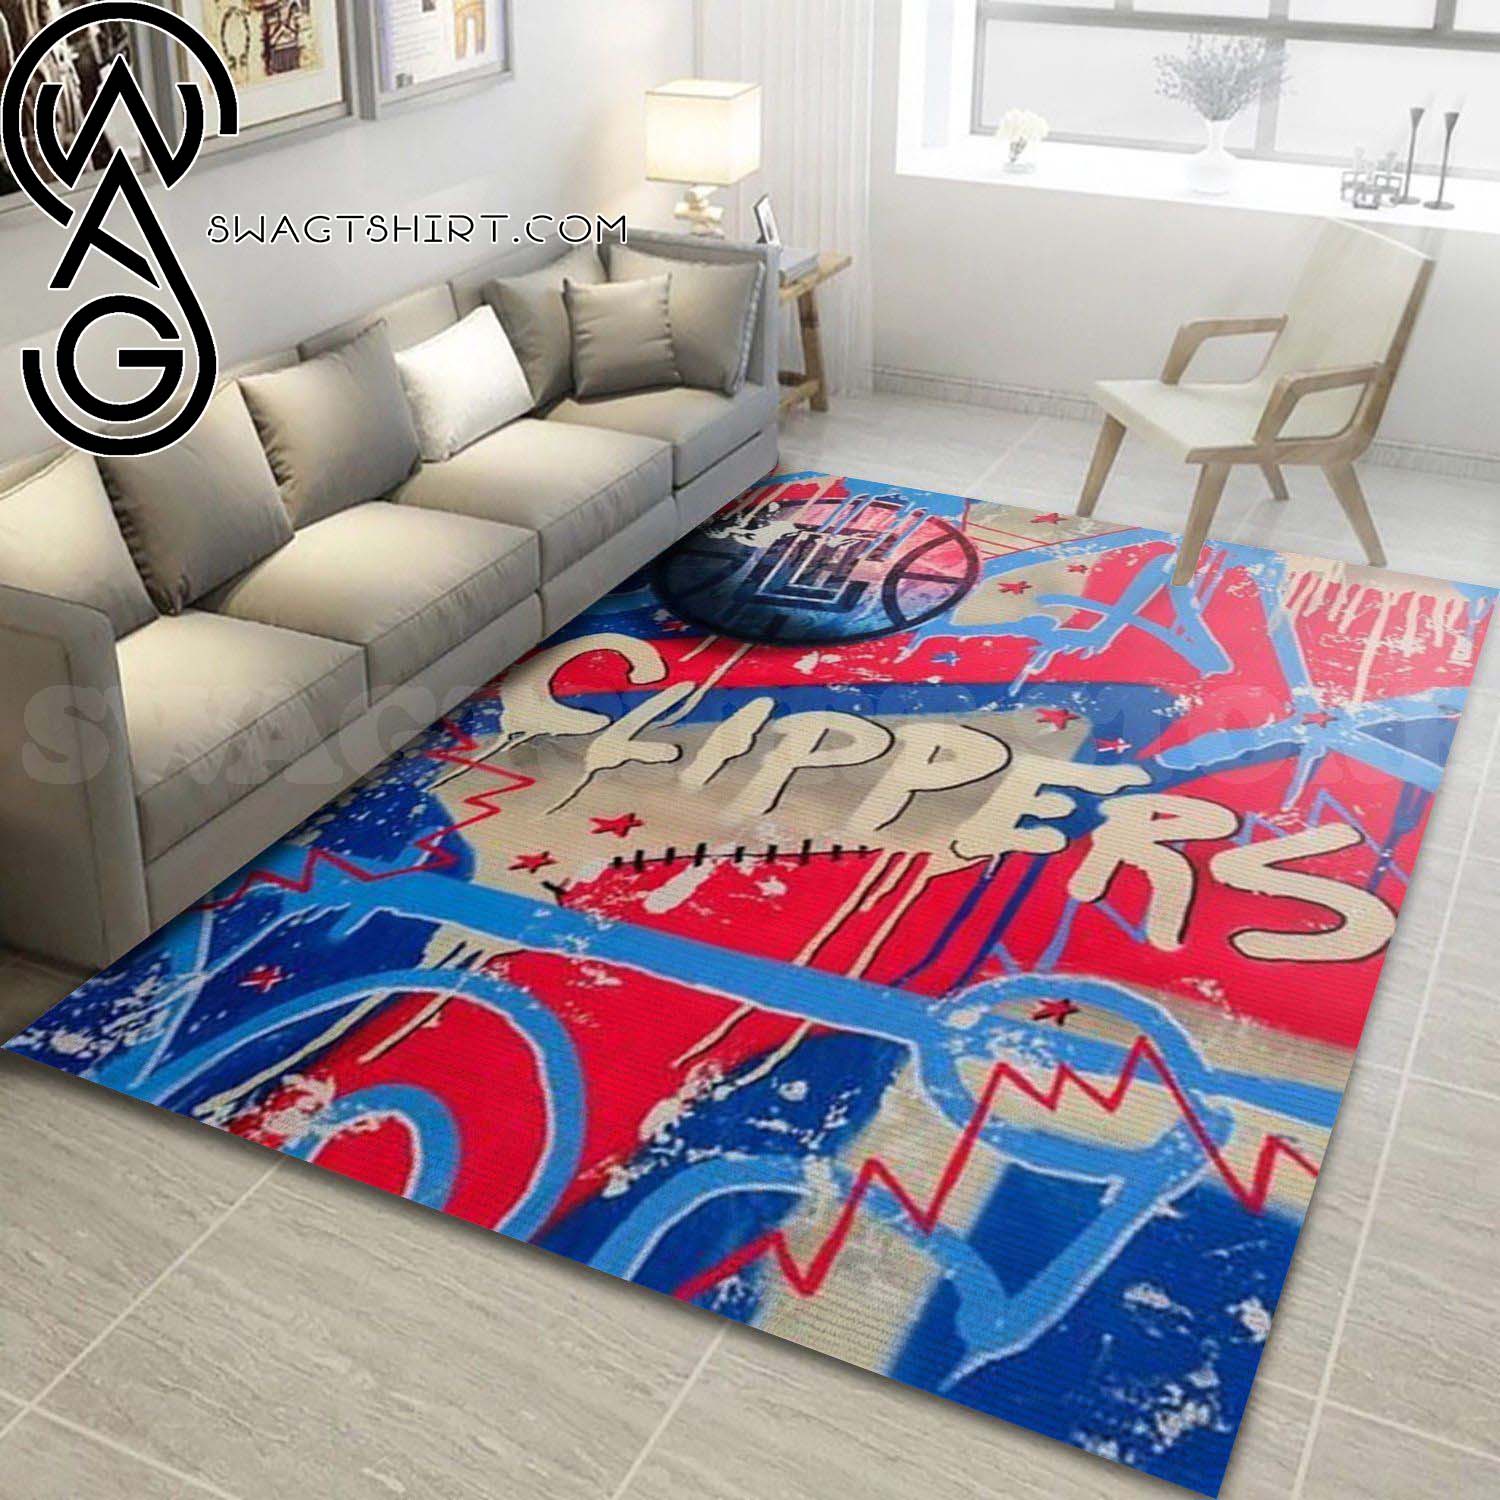 Vintage Los Angeles Clippers Living Room Home Decor Area Rug